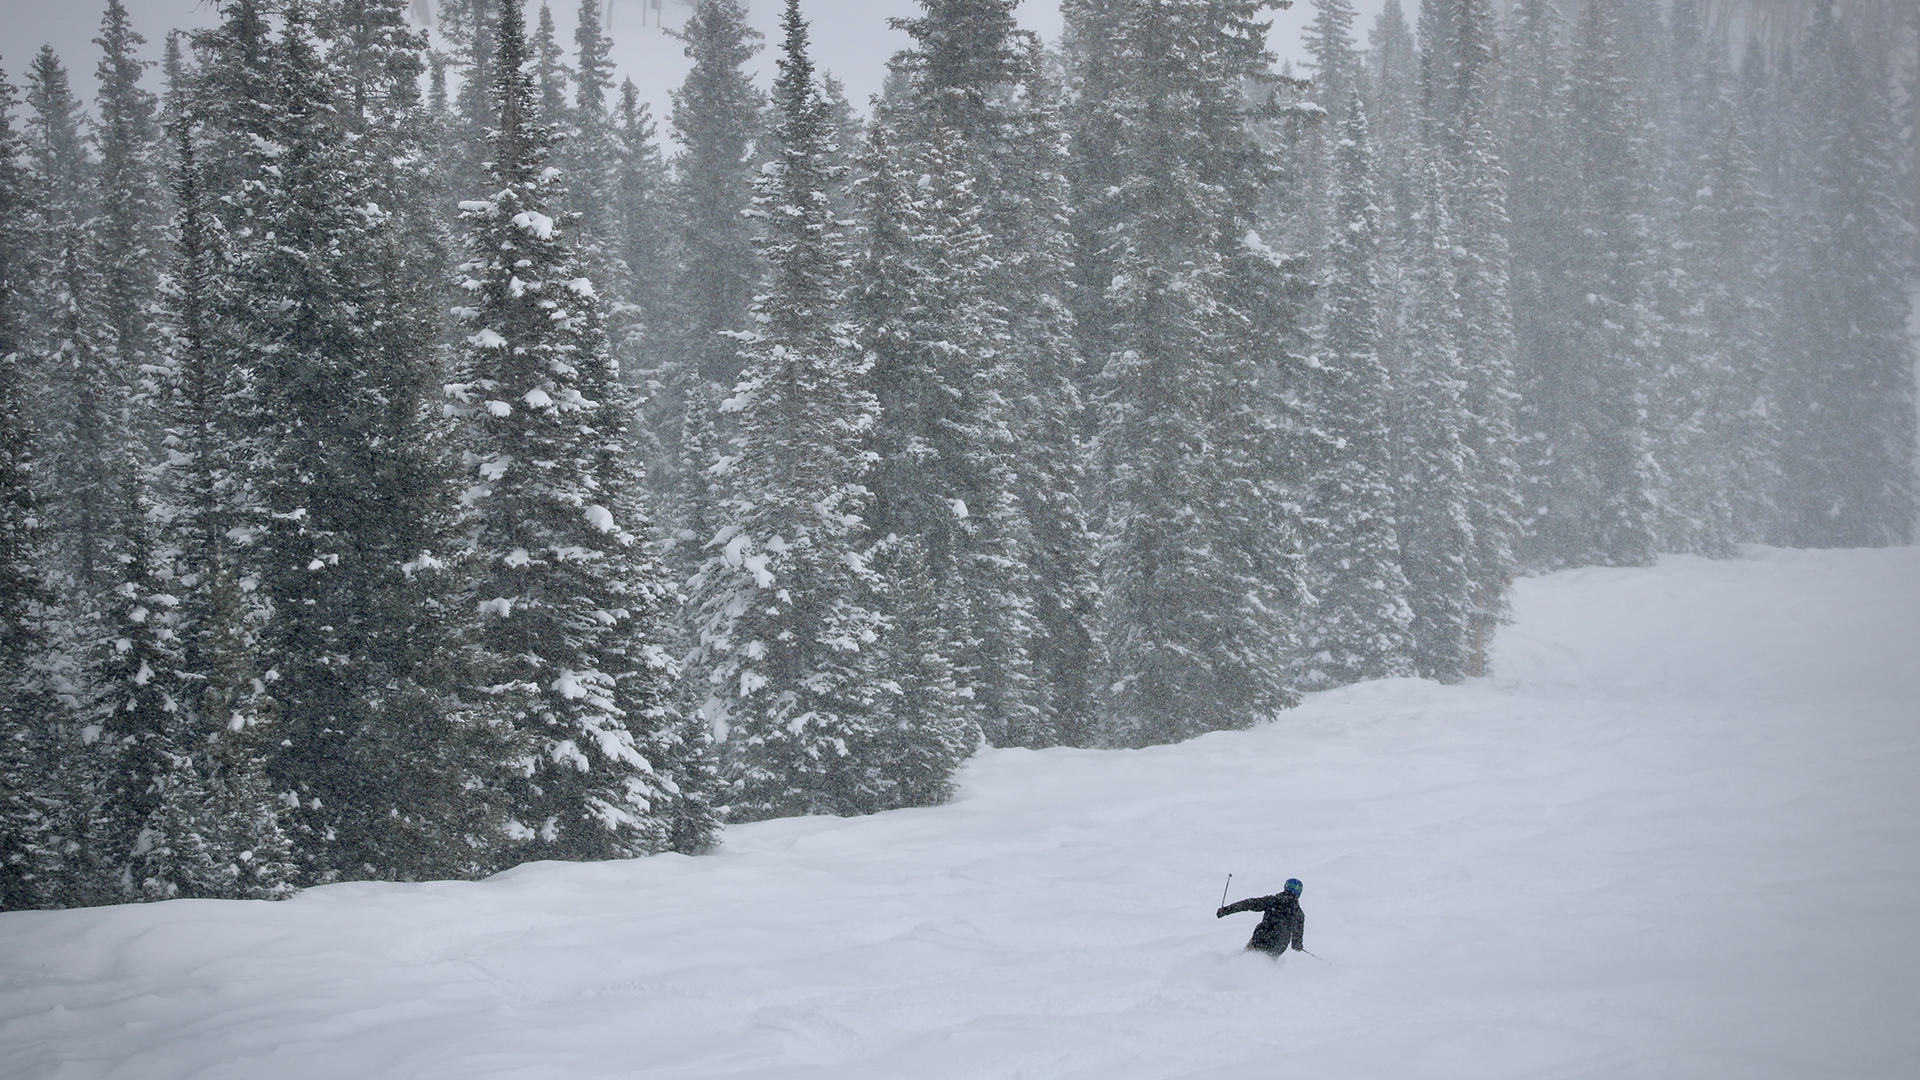 A skier cruises down Snowmass ski area, where January brought heavy snow to the mountains that supply the majority of the Colorado River's water. Scientists say this could provide a temporary boost to shrinking reservoirs.